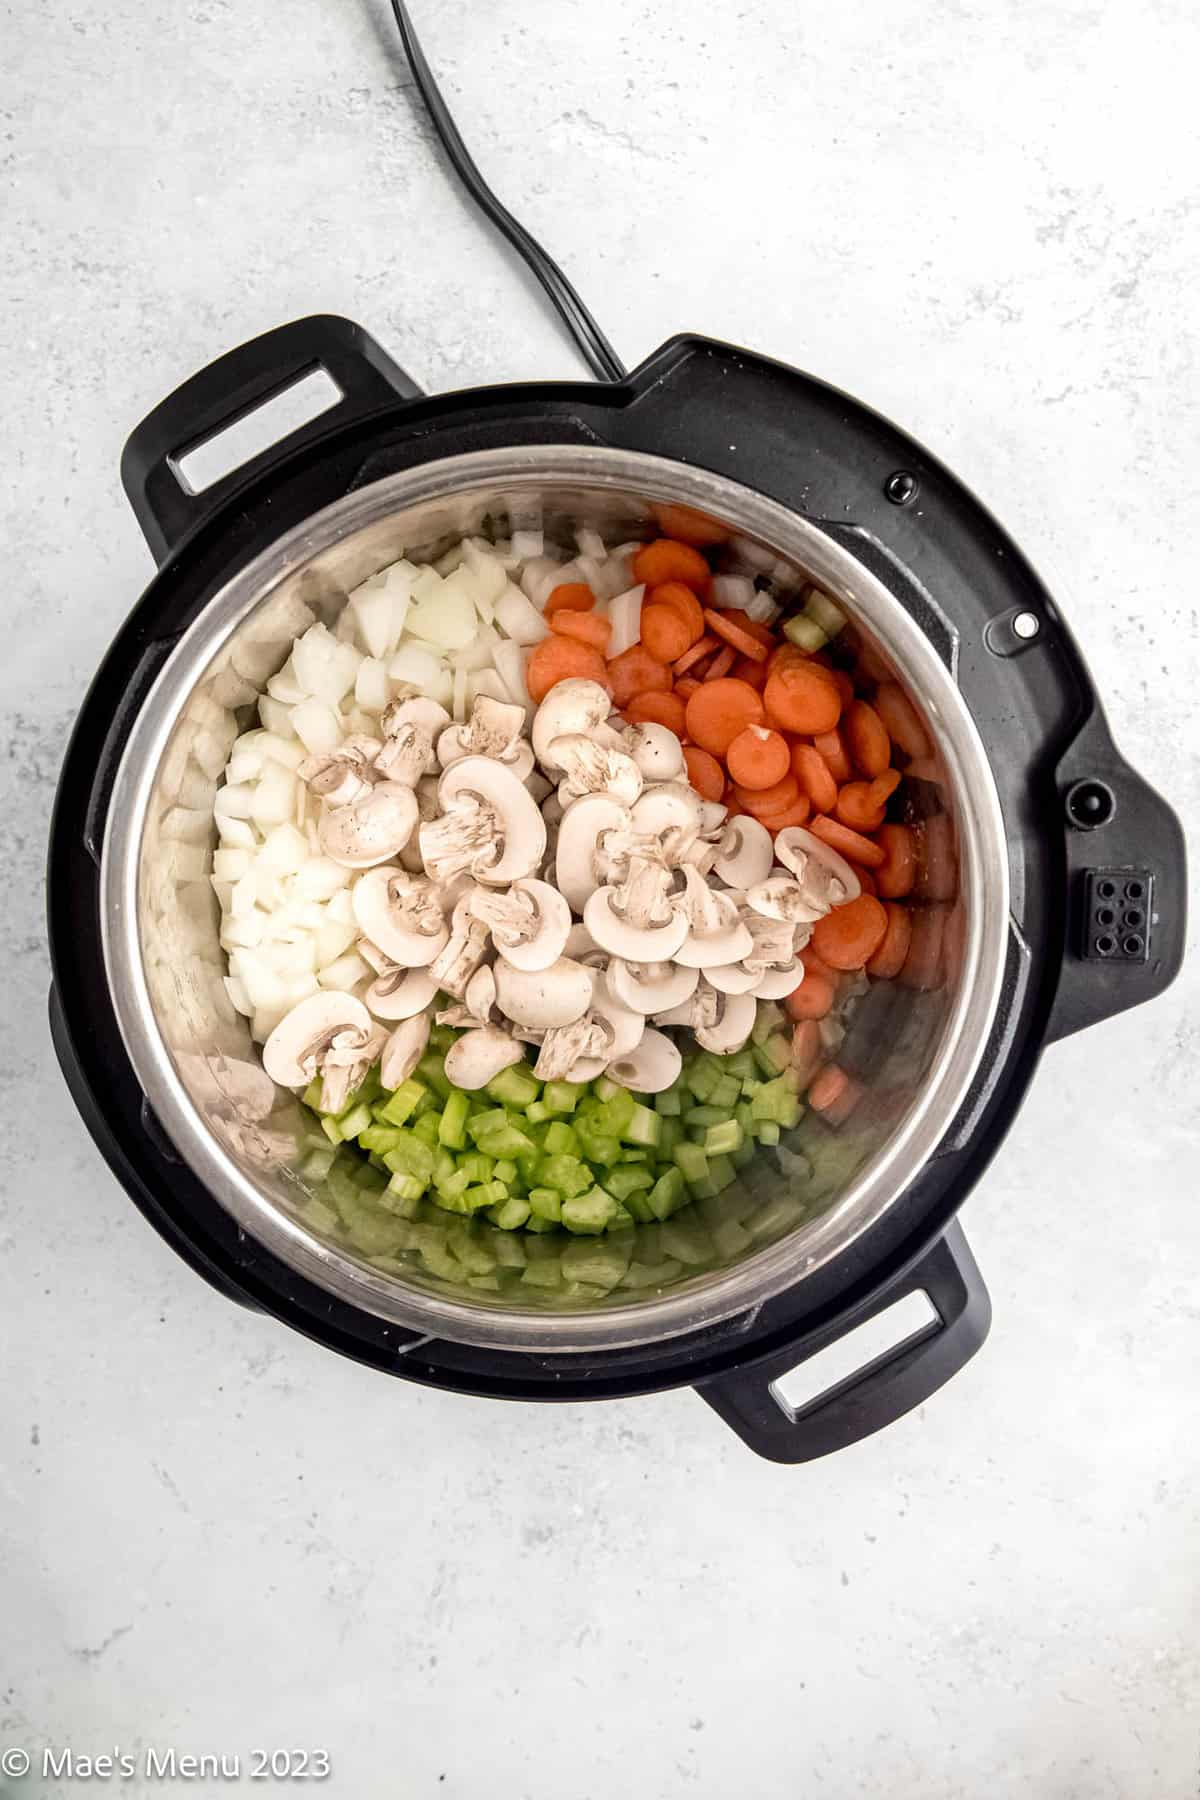 Onions, carrots, mushrooms, and celery in an Instant Pot.